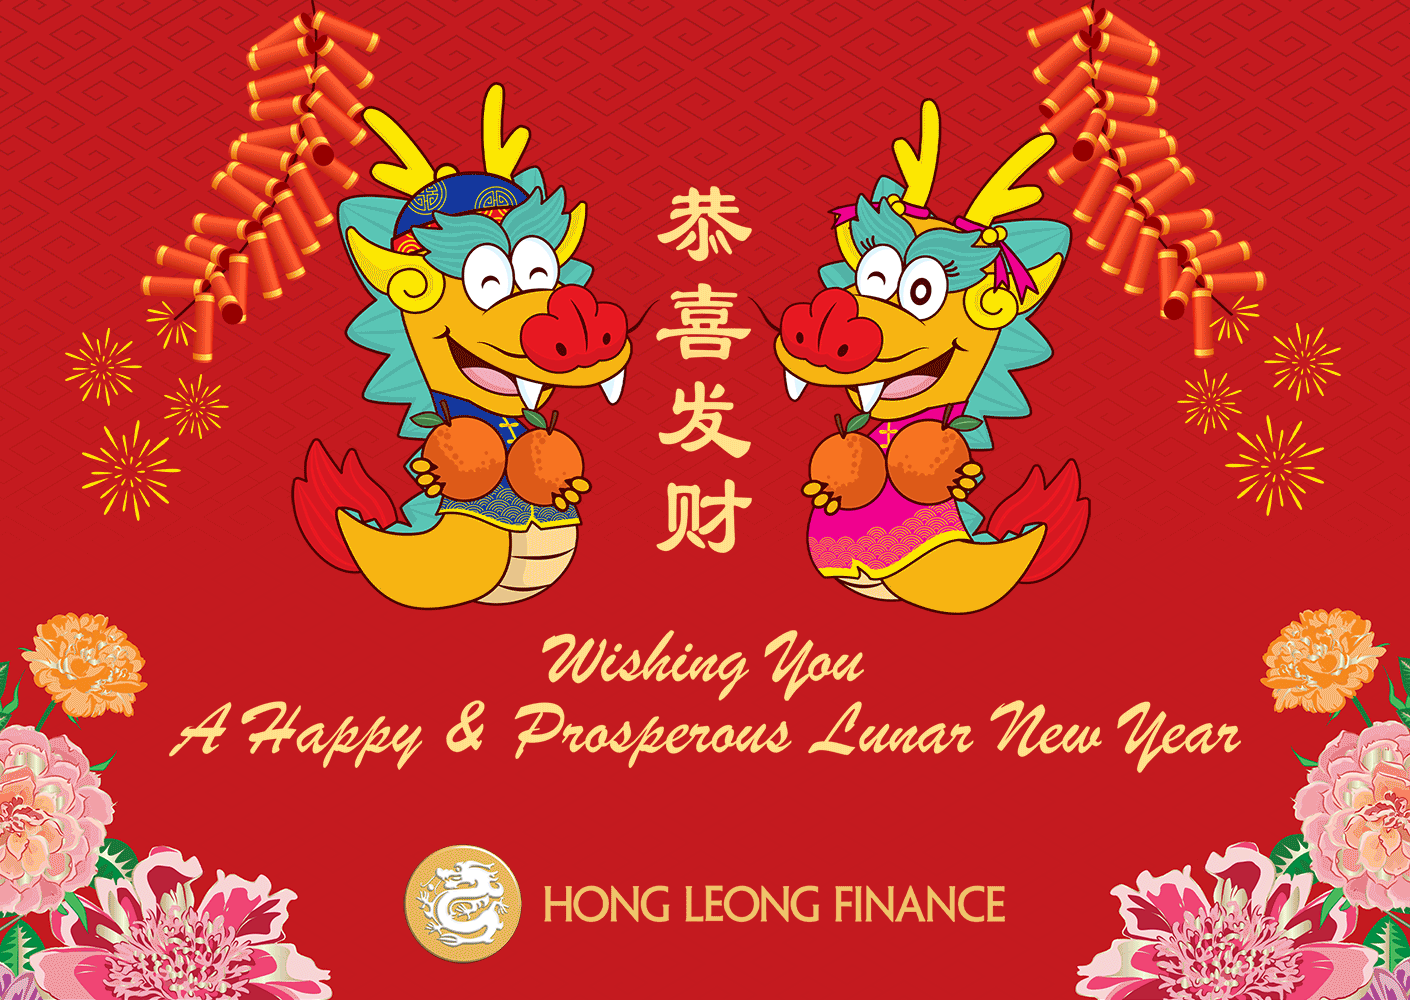 Hong Leong Finance Wishes You A Merry Christmas.